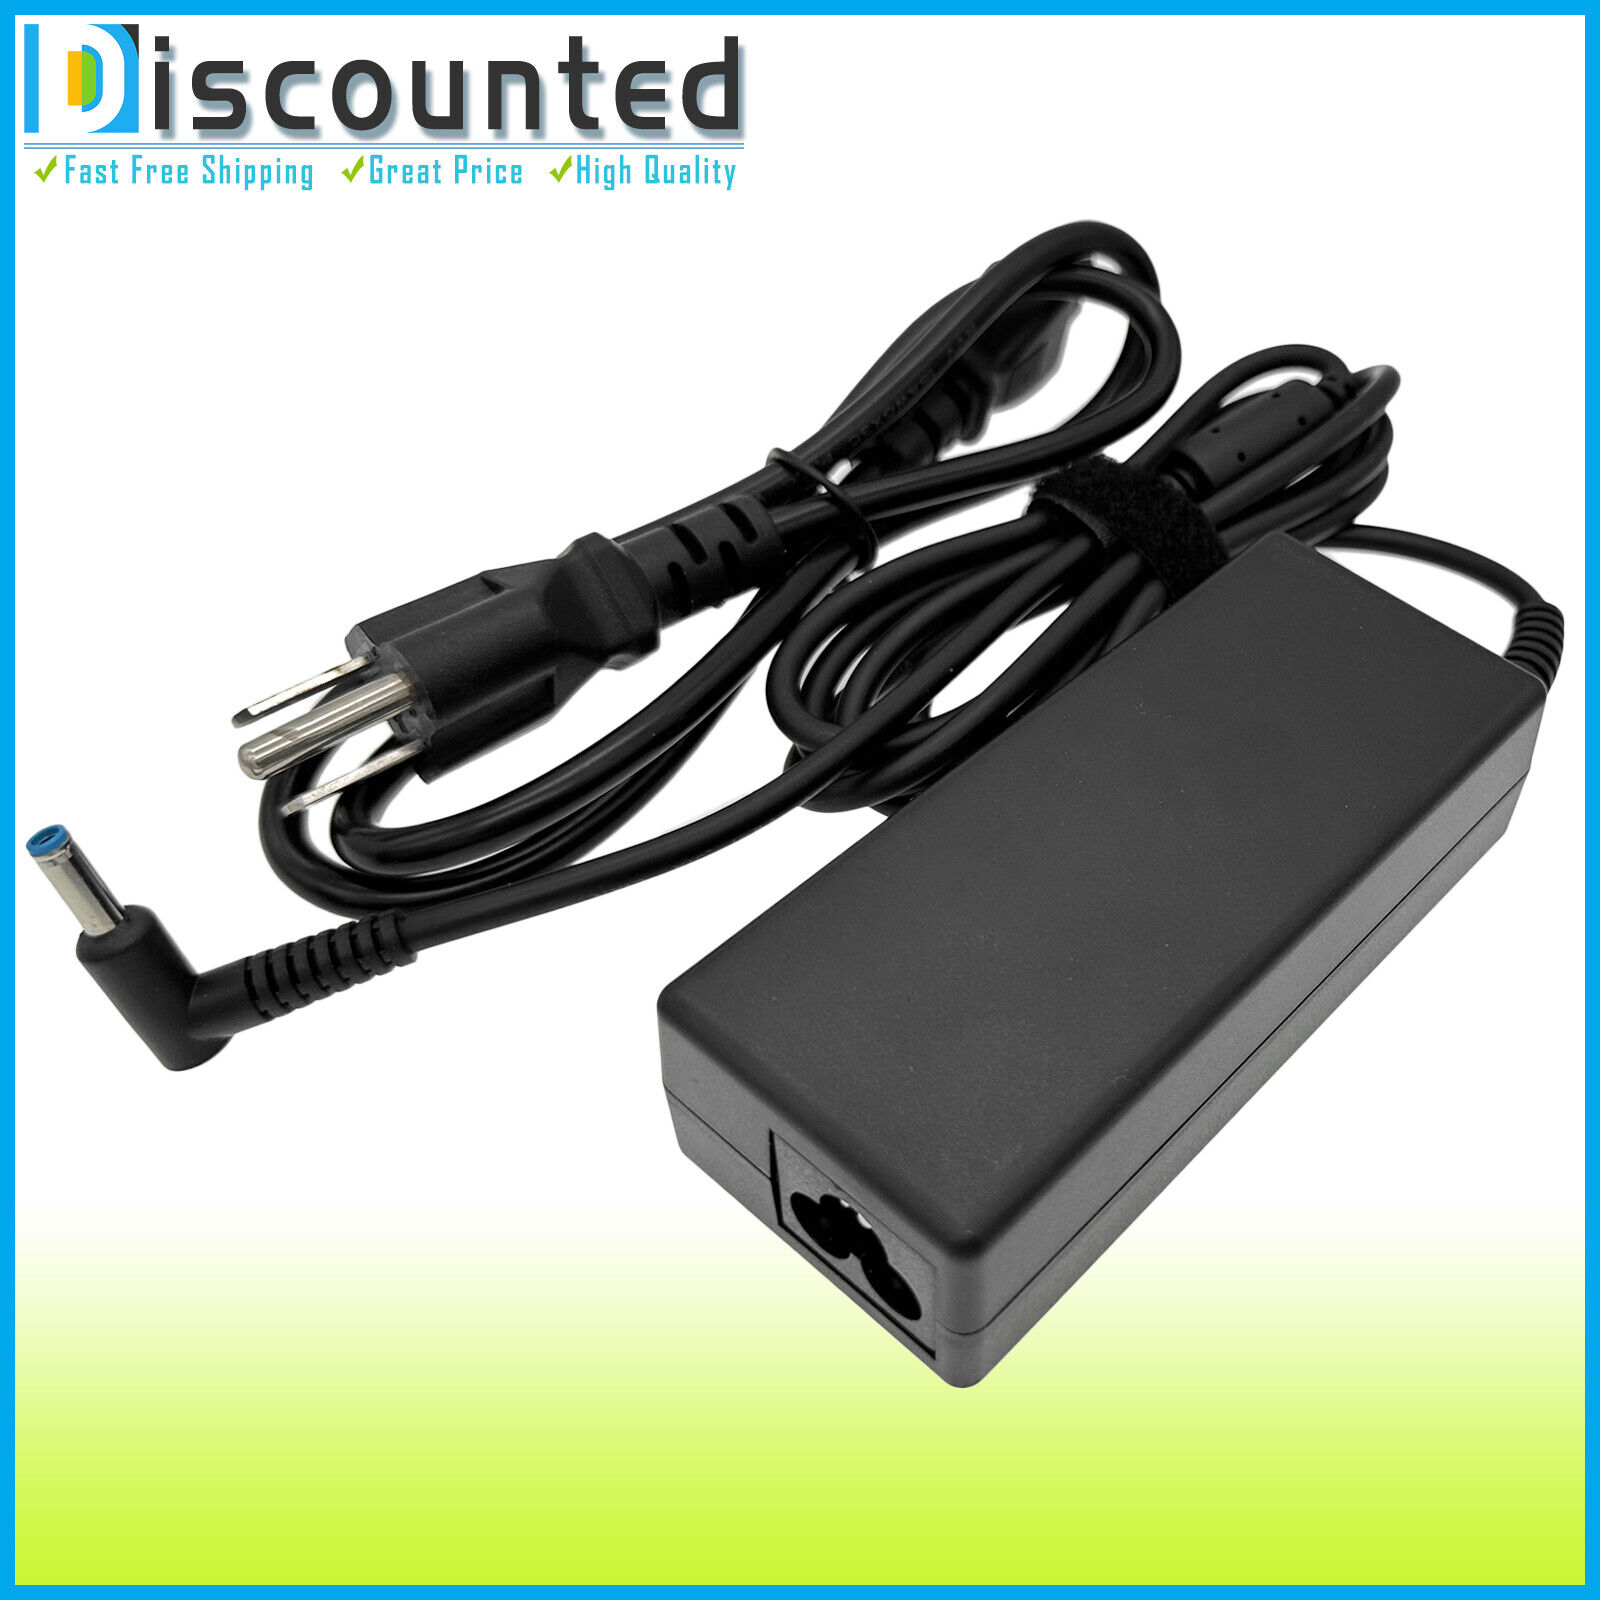 AC Adapter For HP 15-gw0010wm 15-gw0023od 15-gw0035dx Laptop Charger Power Cord